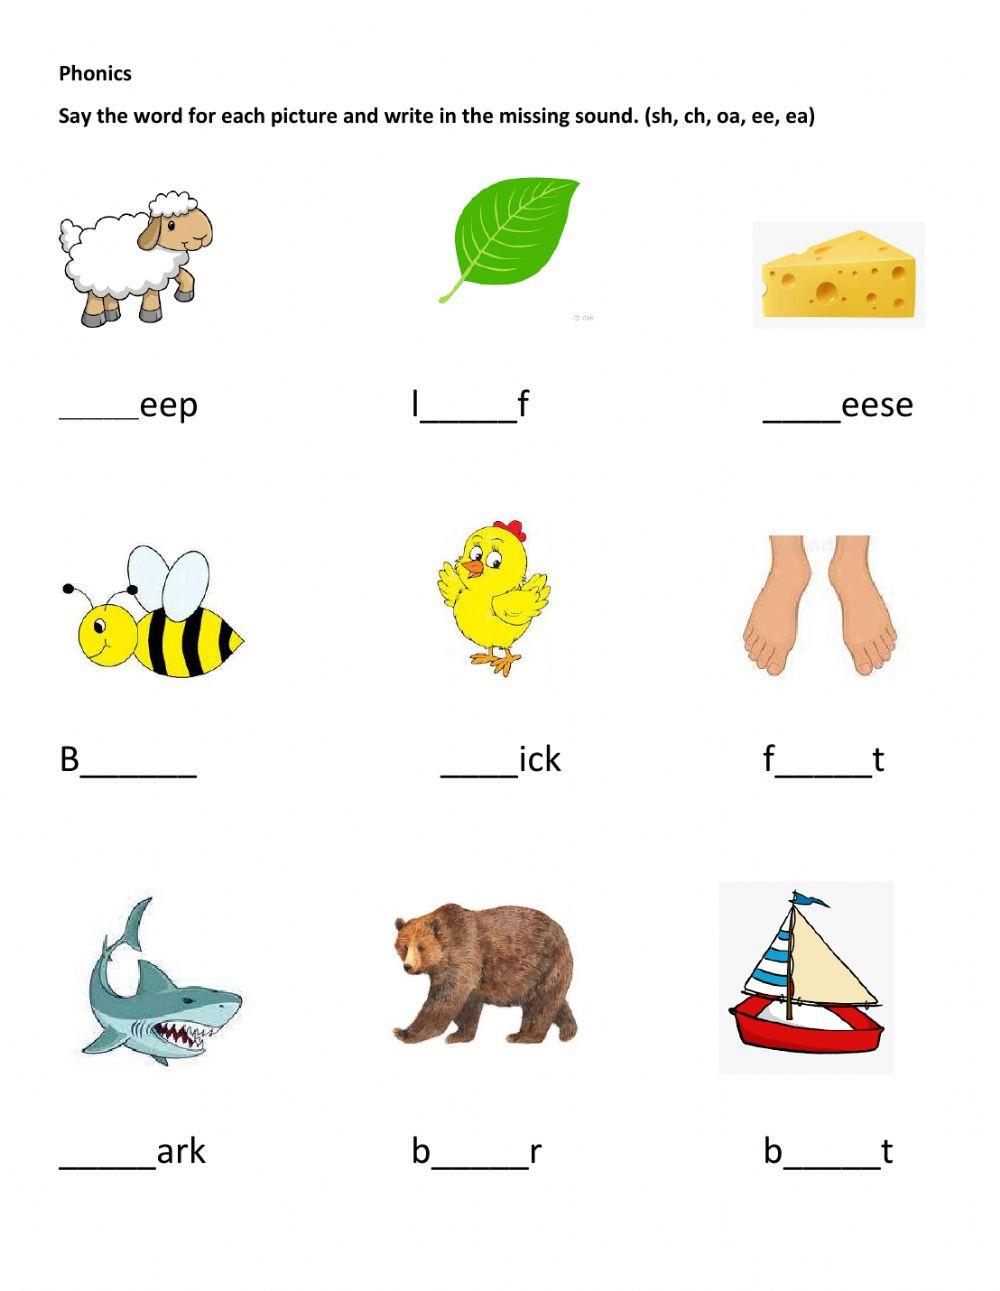 Missing sound in Phonics